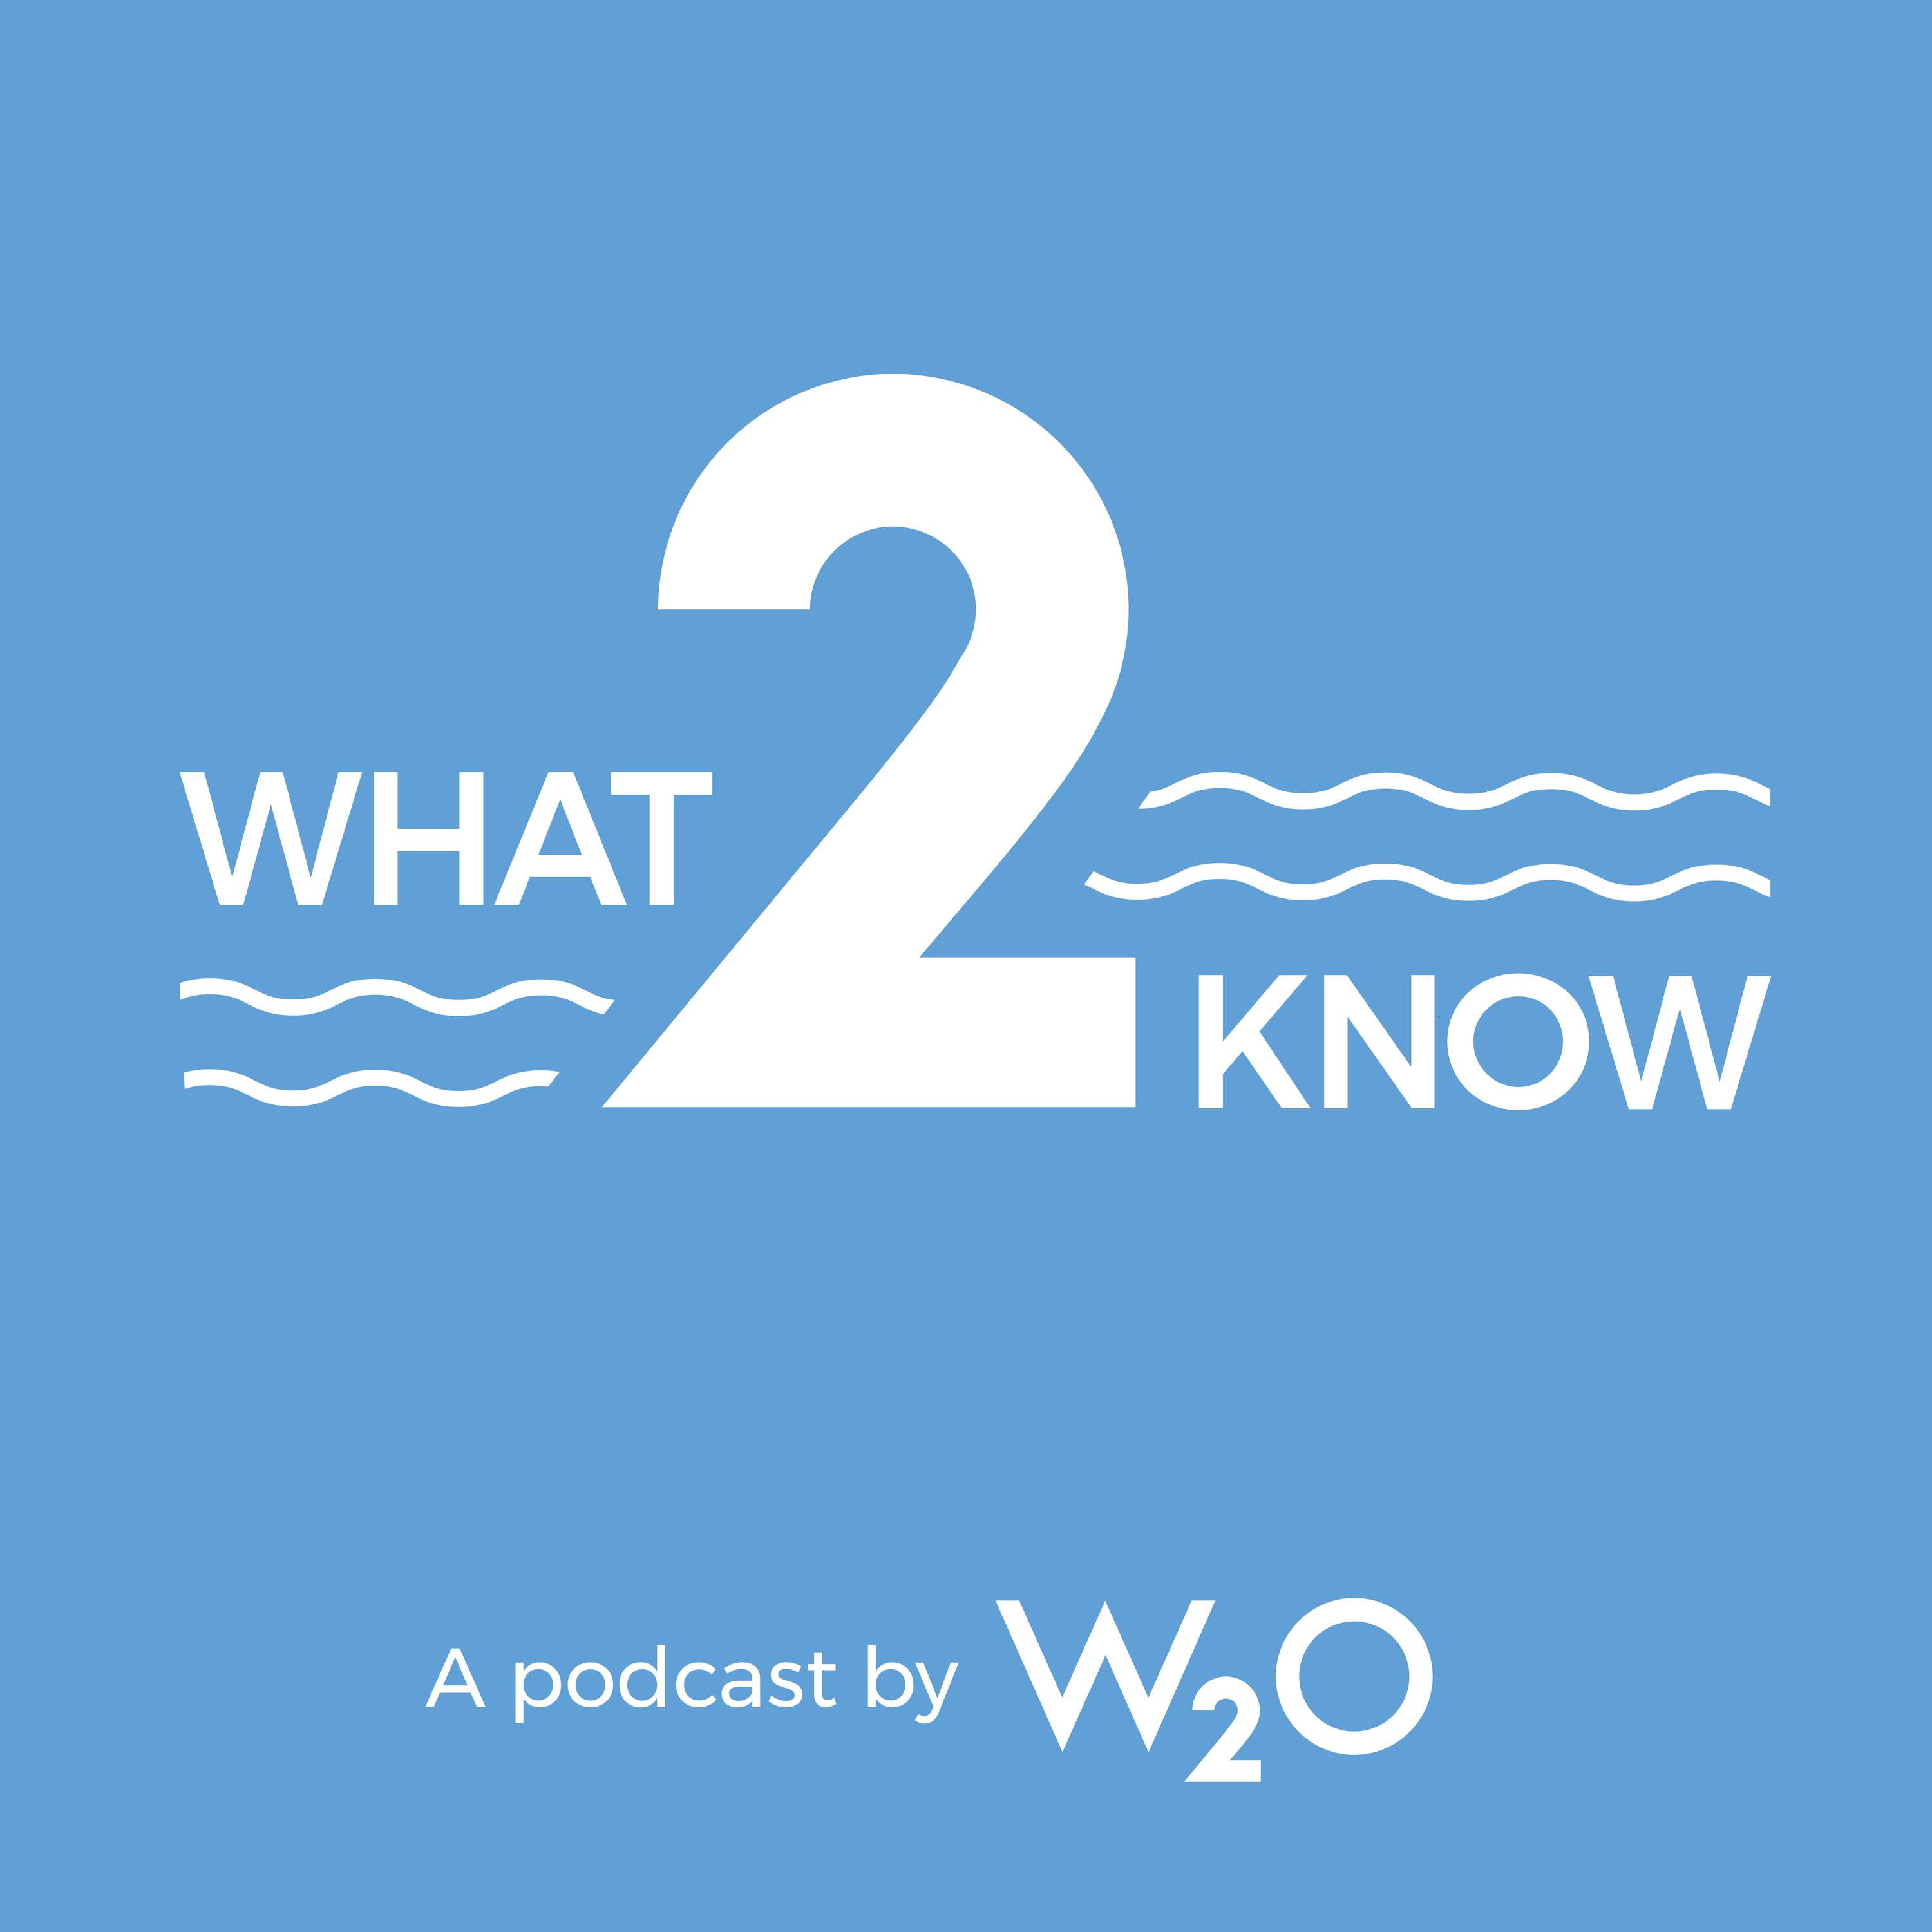 Giving Gratitude & Pausing to Reflect: Aaron Strout, CMO of W2O & Host of What2Know